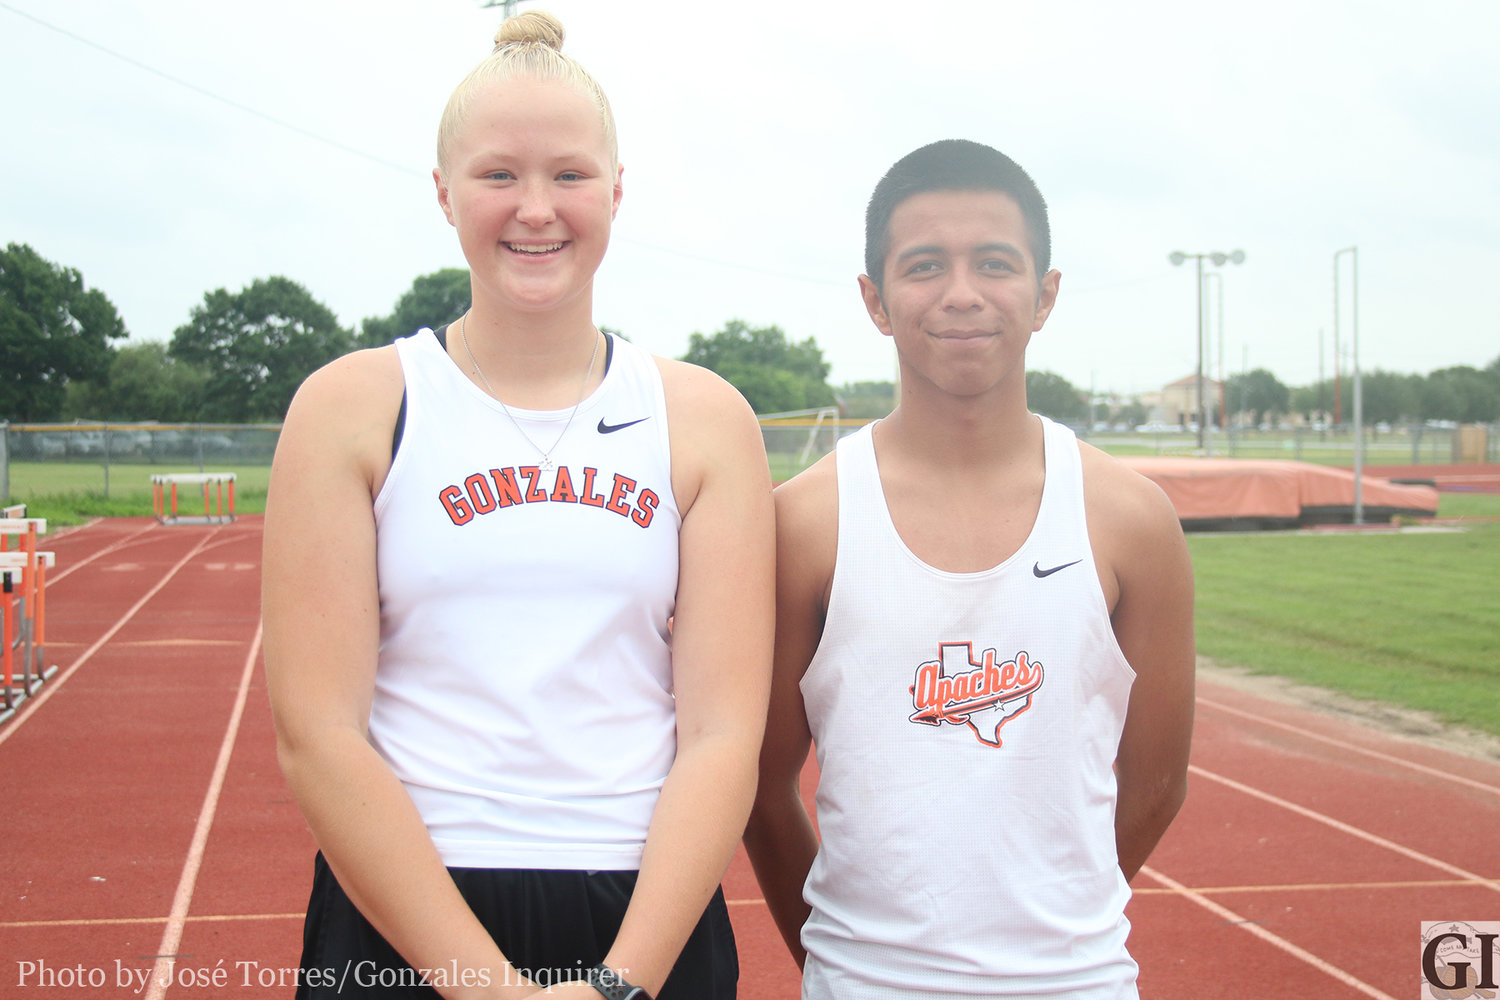 Juniors Devon Williams and Antonio Hernandez are headed to the University of Texas to compete in the UIL State Track and Field meet this weekend. This will be Williams’ second straight trip to the meet and Hernandez’s first.